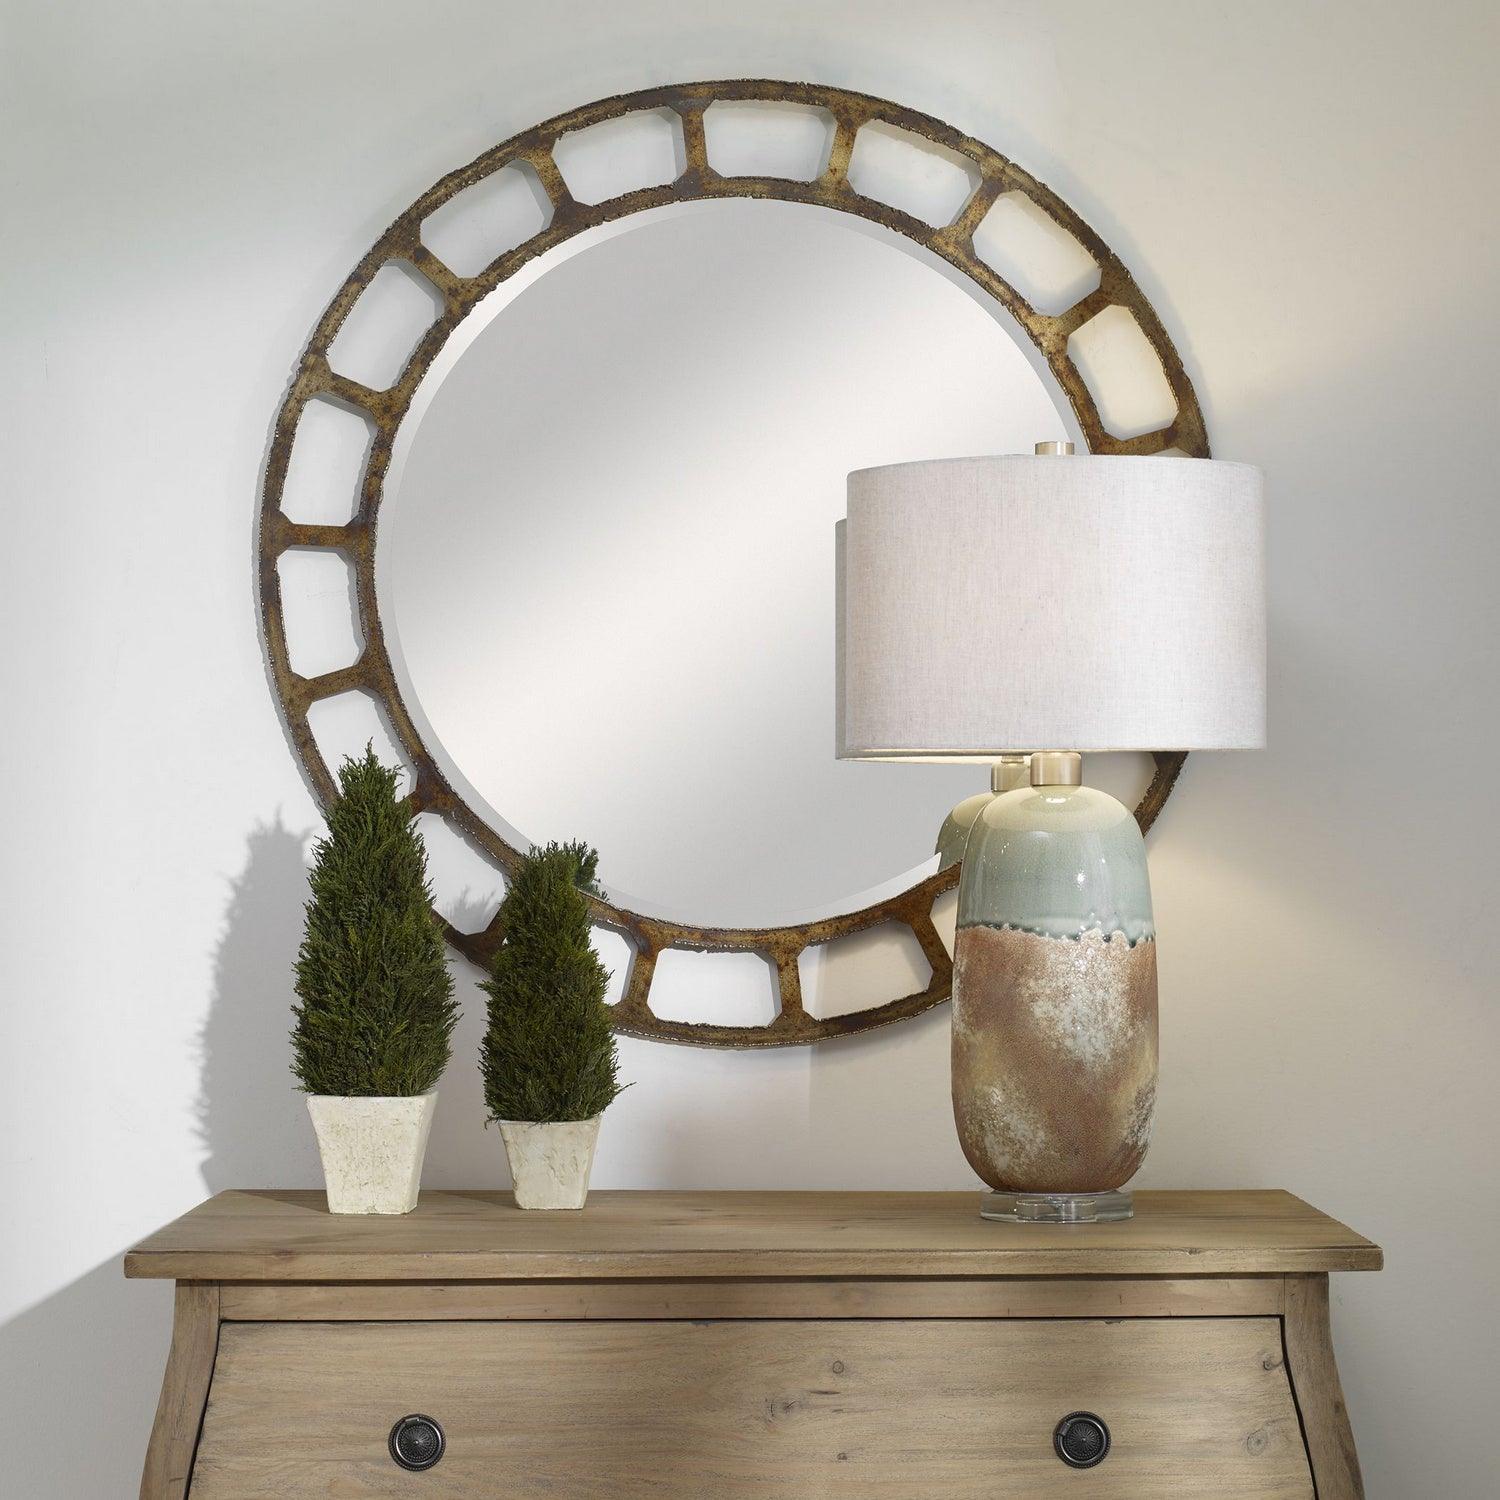 The Uttermost - Darby Mirror - 09759 | Montreal Lighting & Hardware